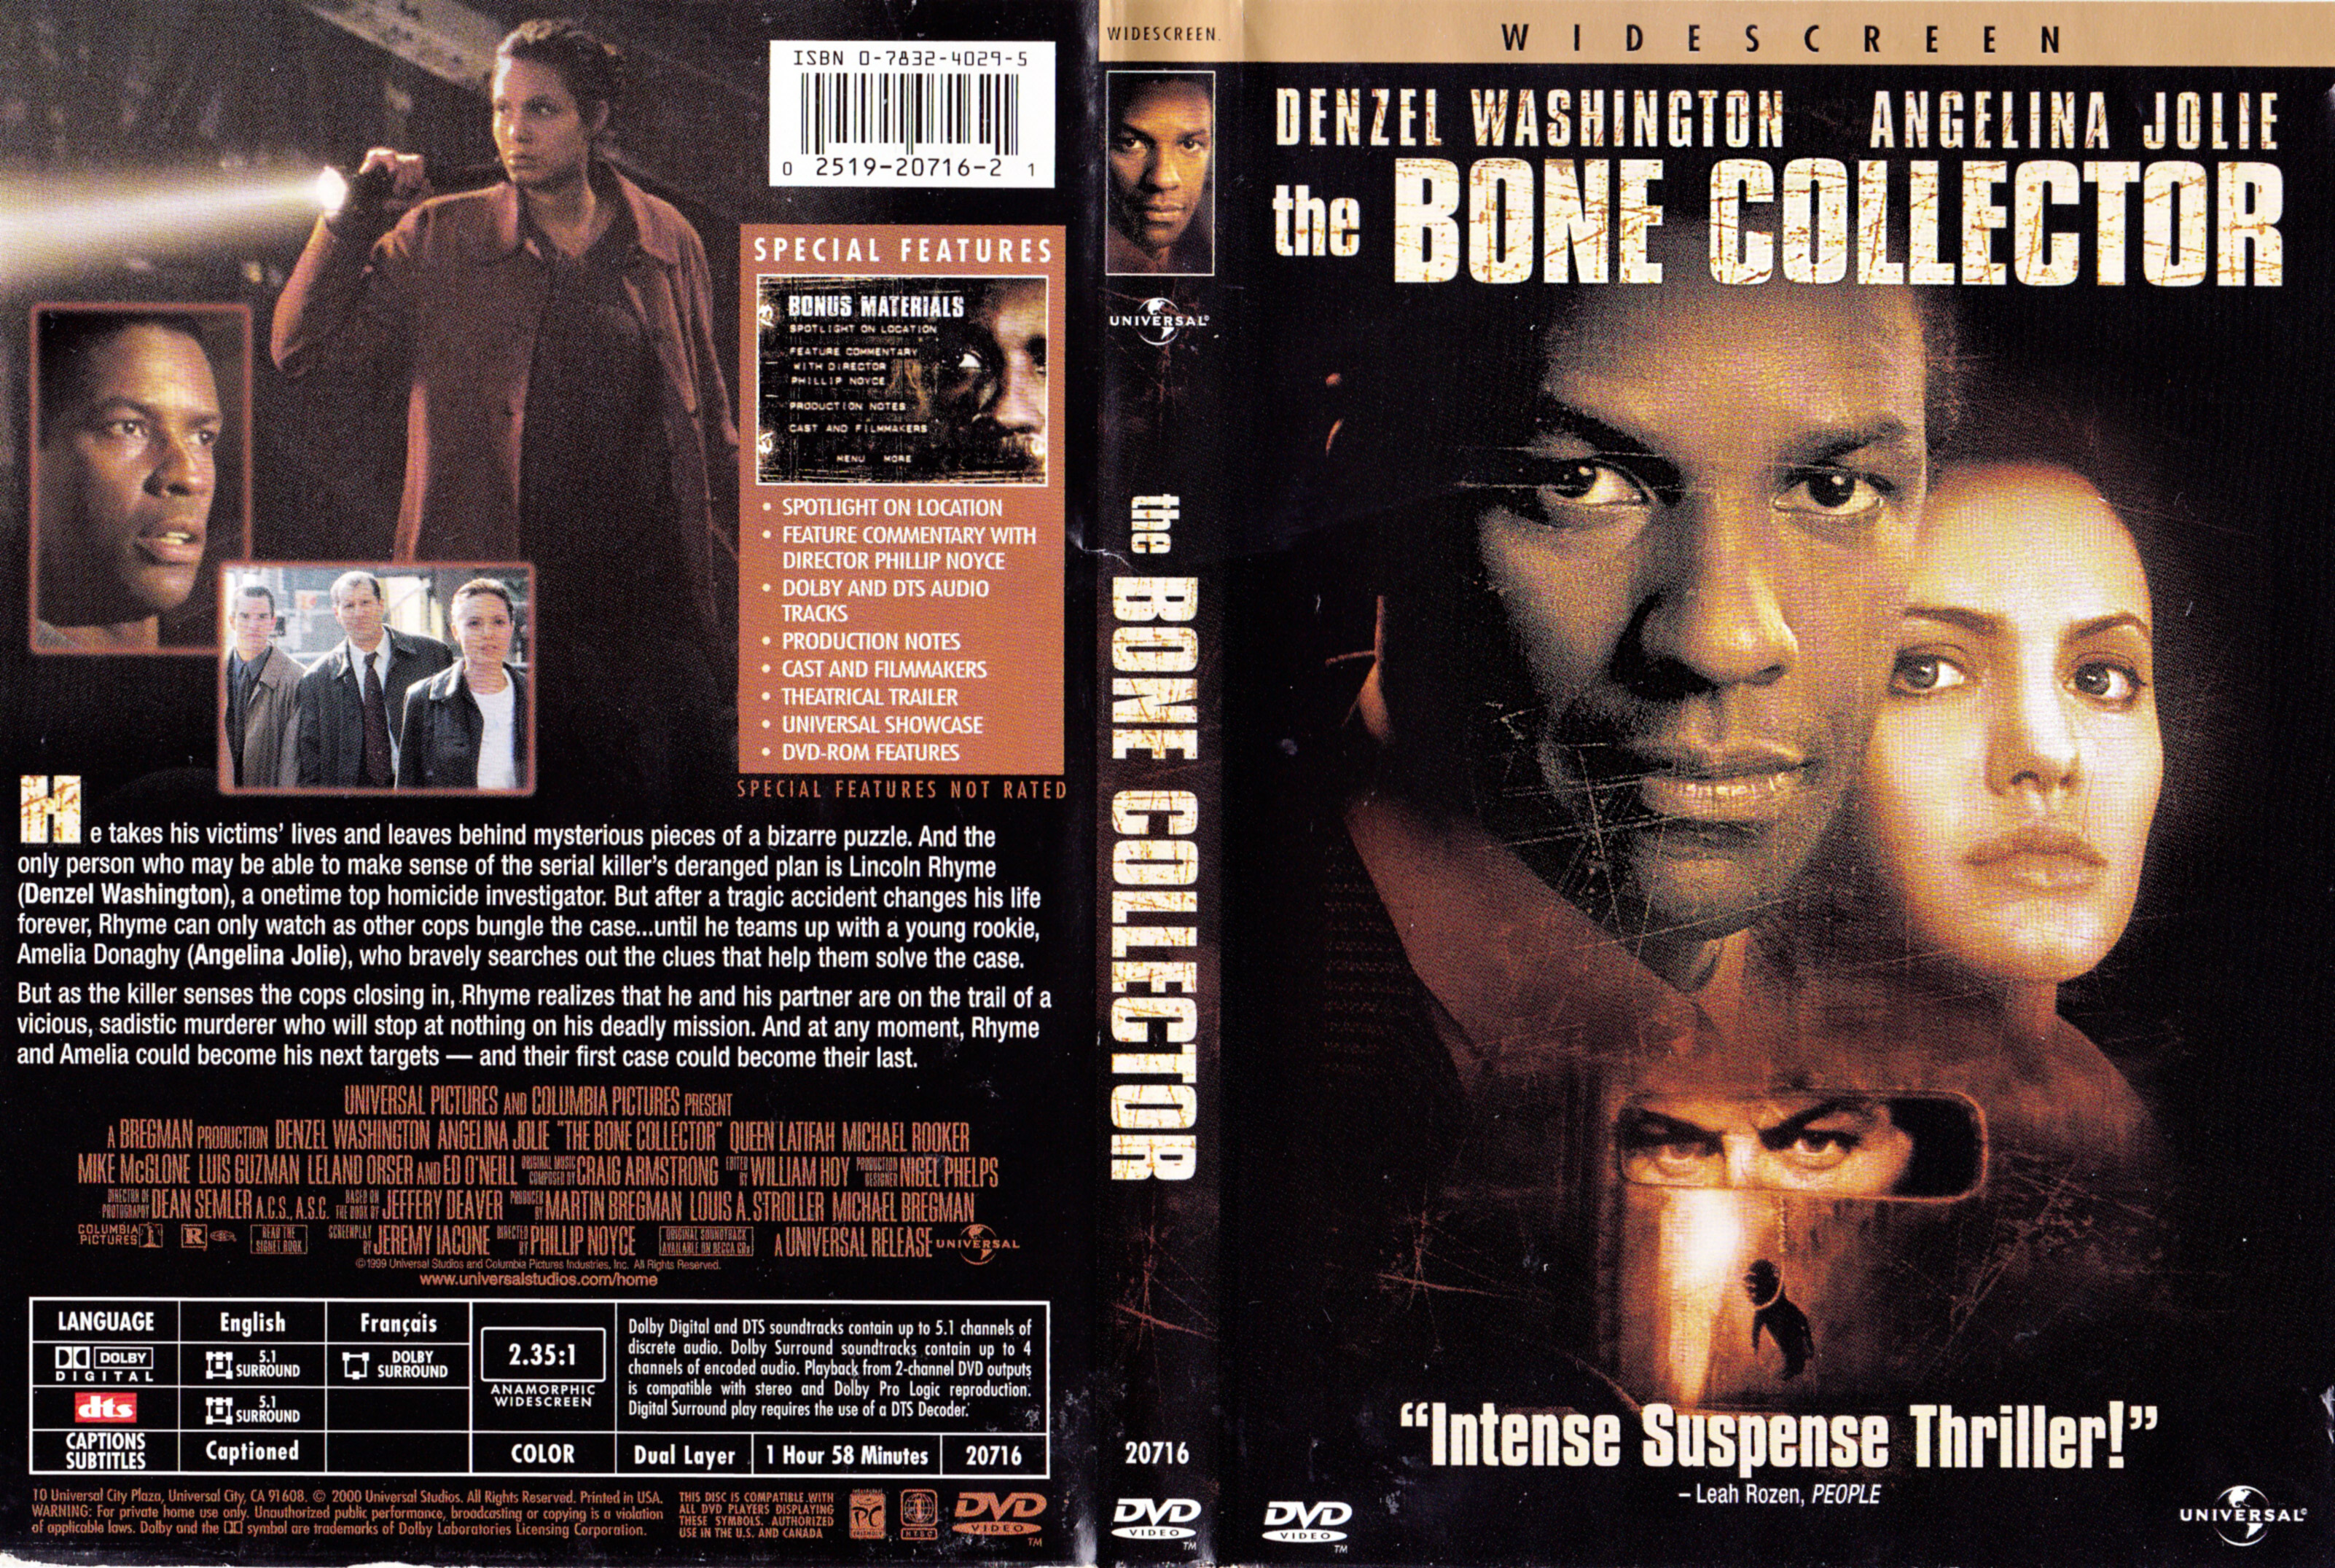 Jaquette DVD The bone collector (Canadienne)